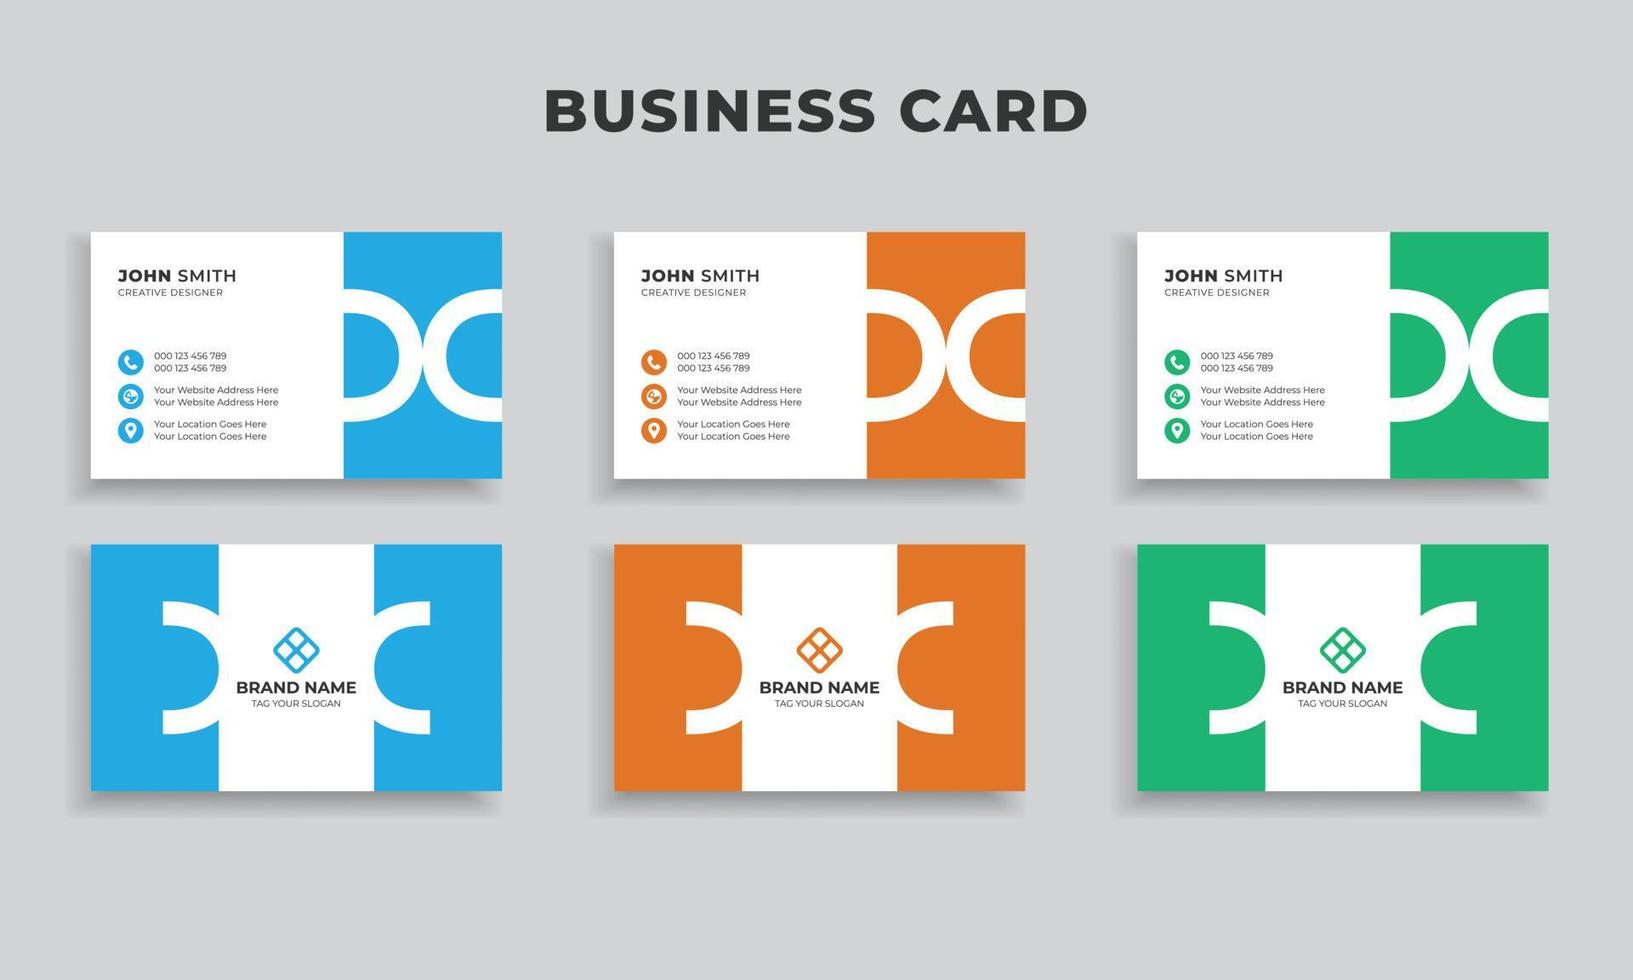 Business Card Design Template. Business Card, Modern Business Card, Creative Business Card Design Template, Visiting Card vector